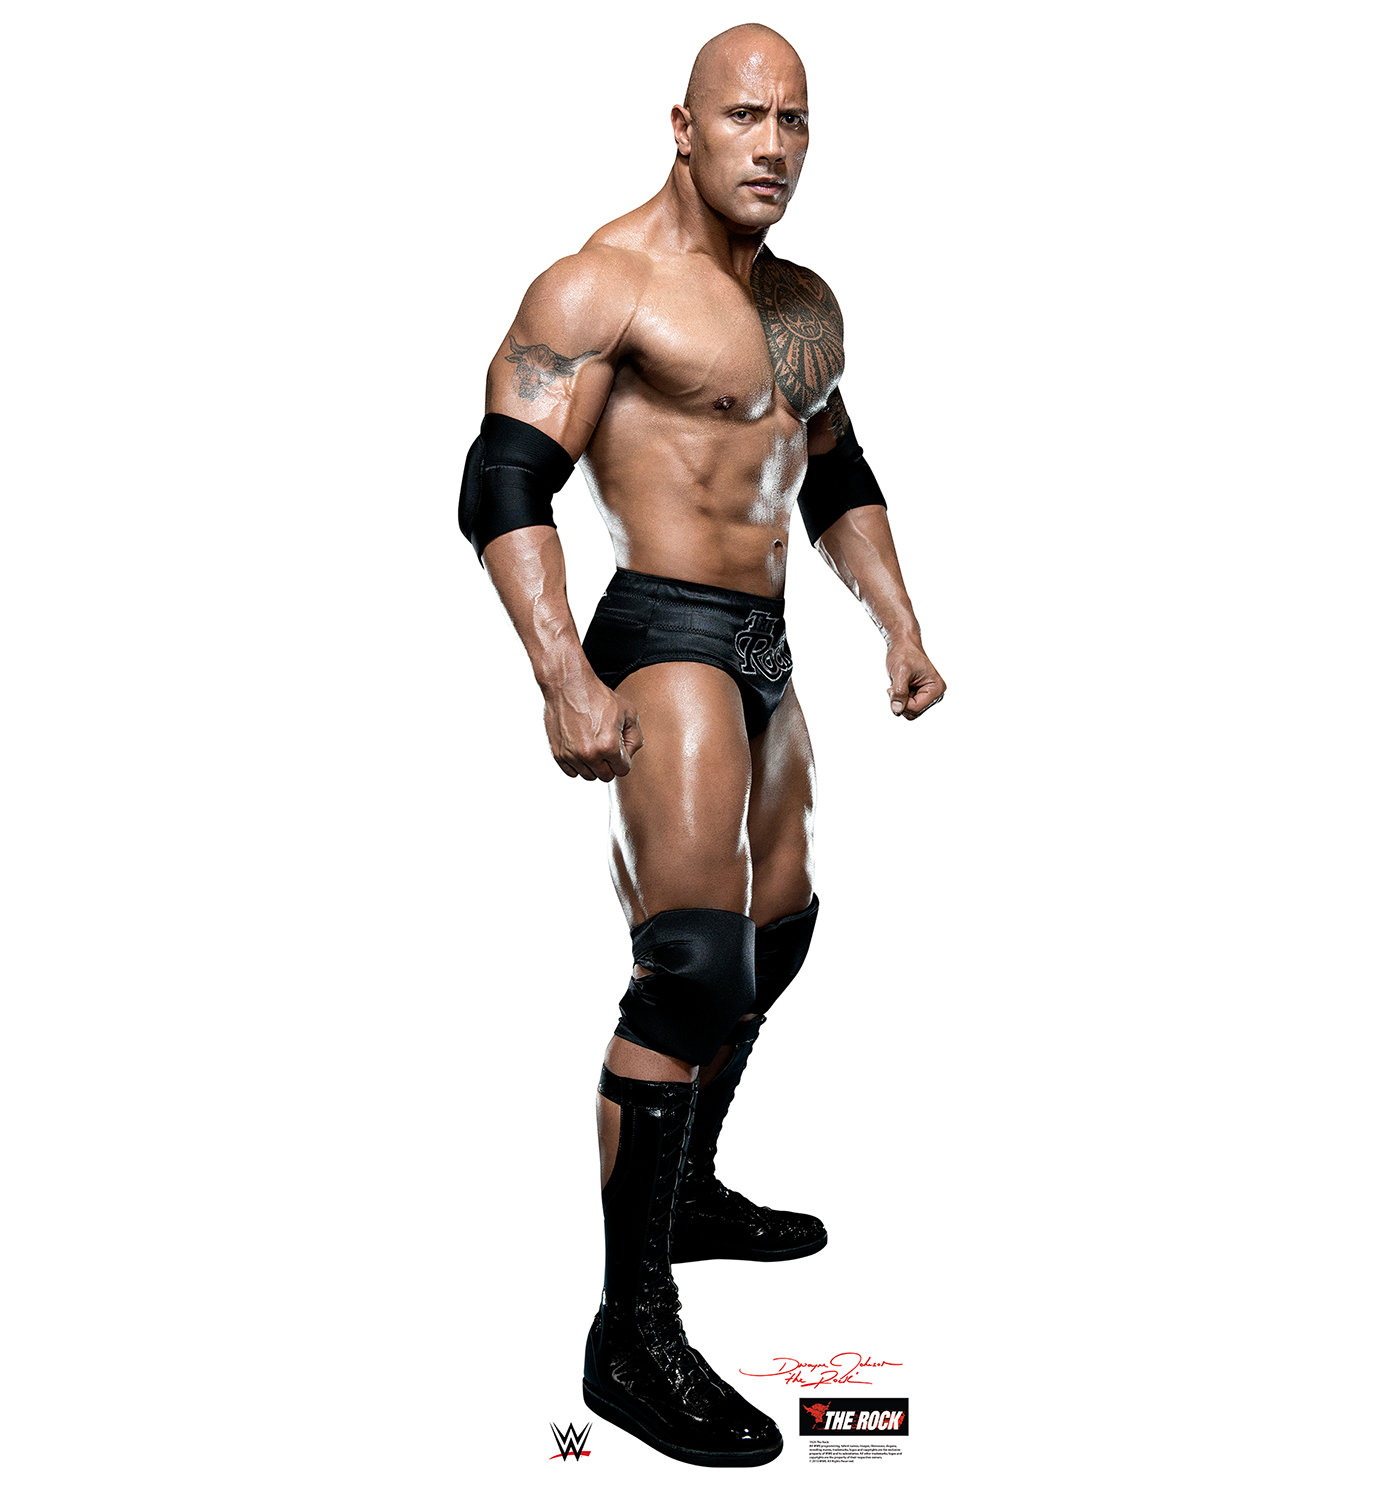 The World of the Rock WWE 